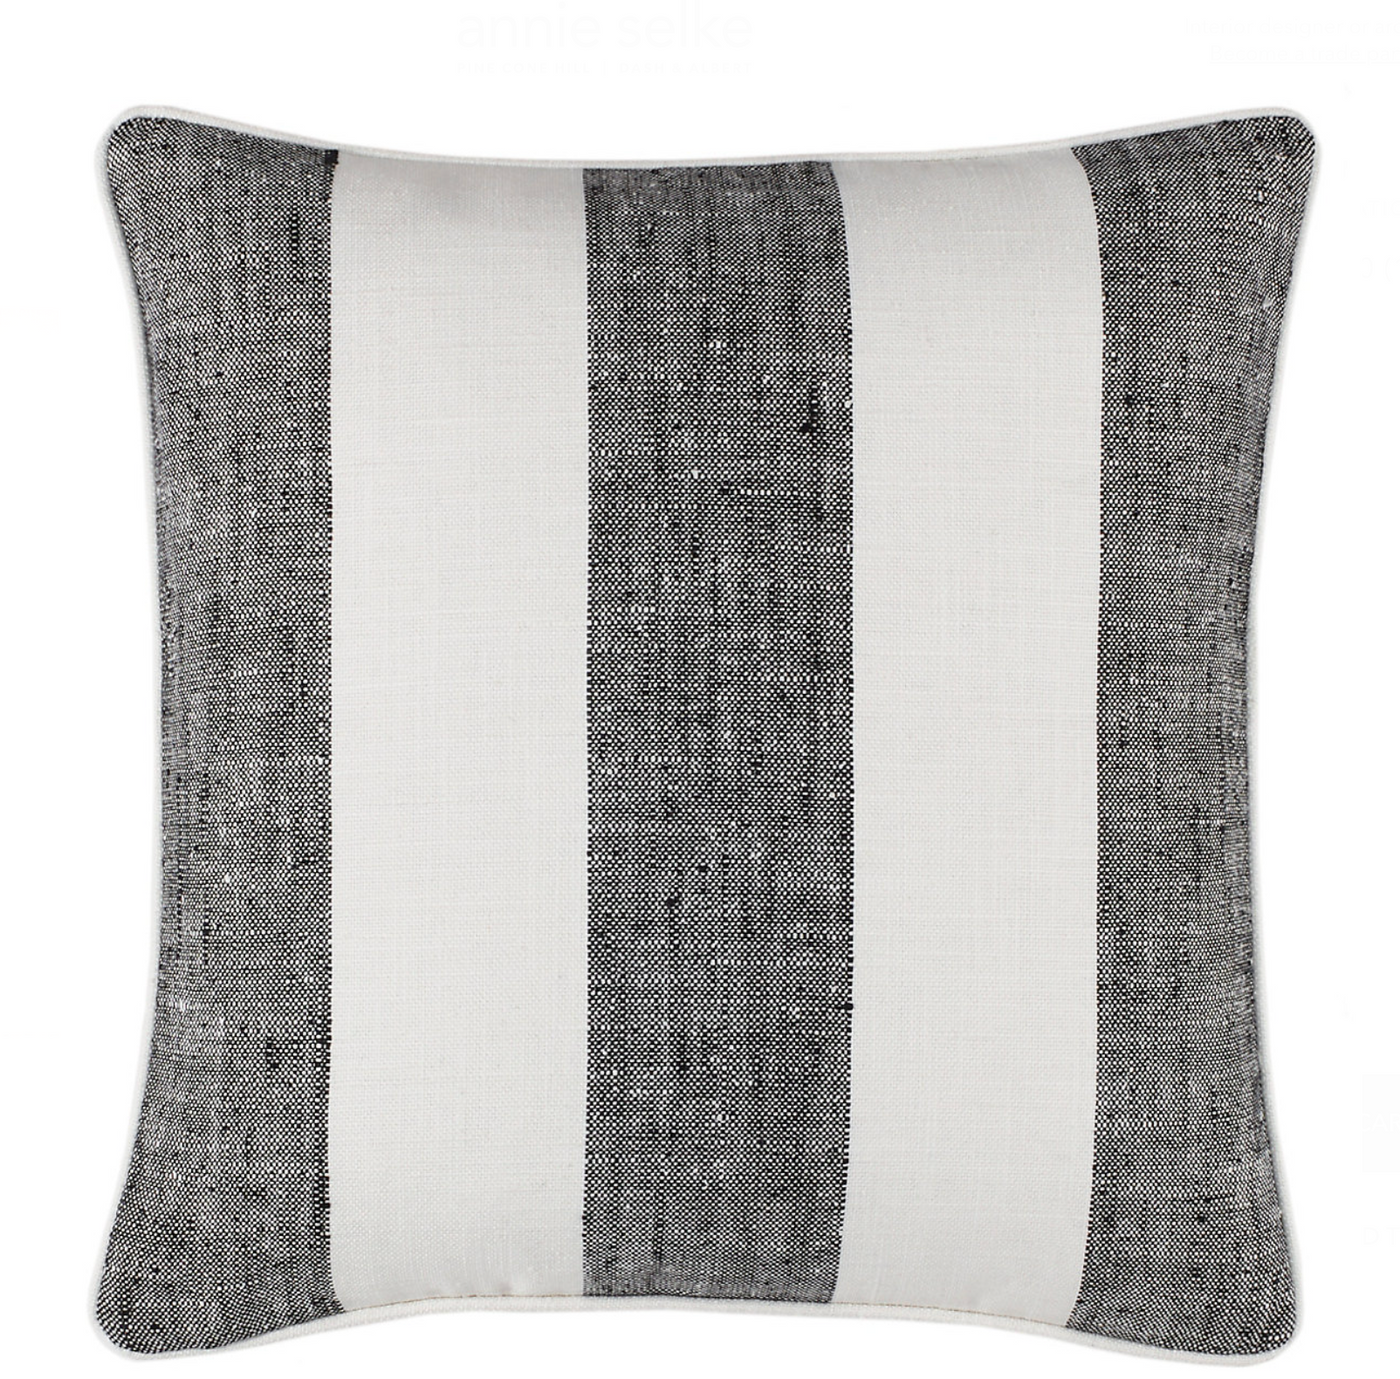 PILLOW DECORATIVE INDOOR/OUTDOOR STRIPE (Available in Colors and Sizes)